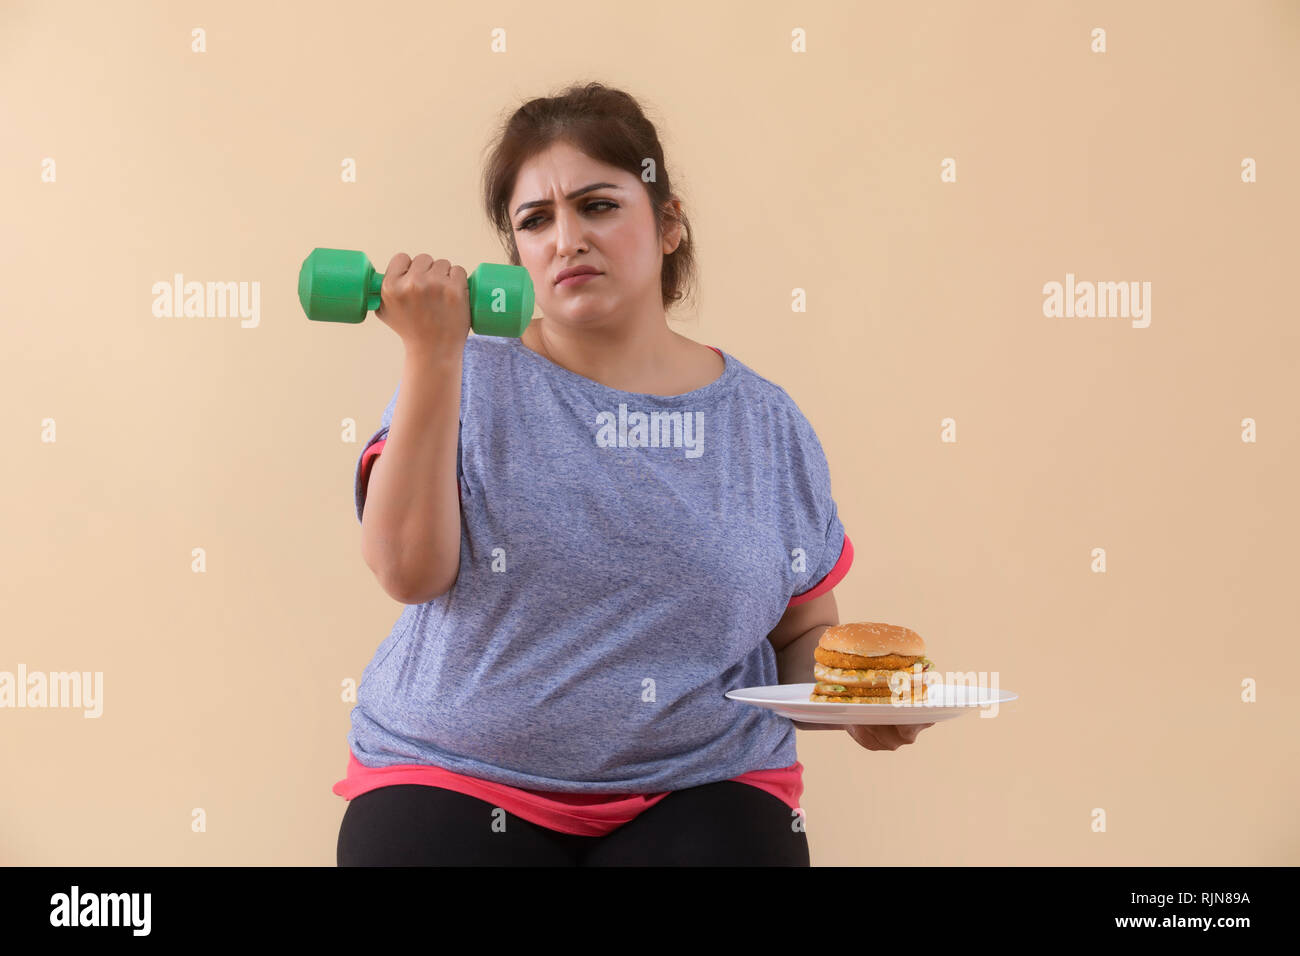 Sad Overweight Woman holding a burger and dumbbell Stock Photo